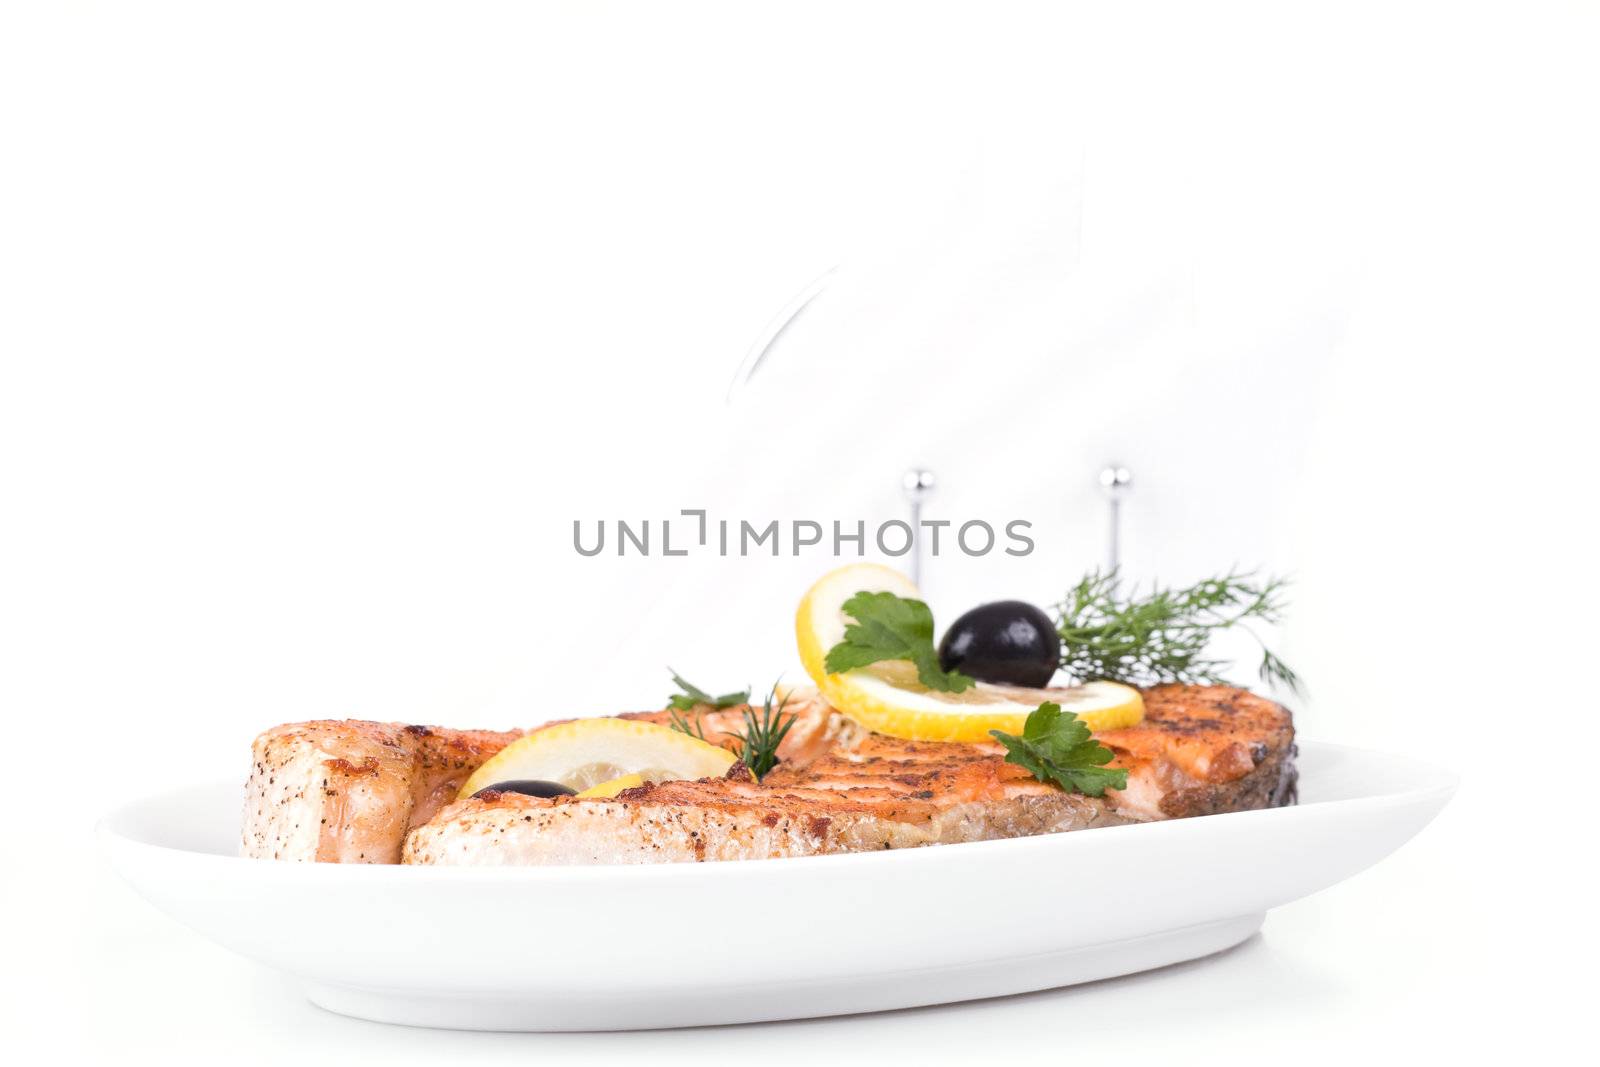 Appetizing Grilled Salmon with lemon, black olives and mixed greens isolated over white